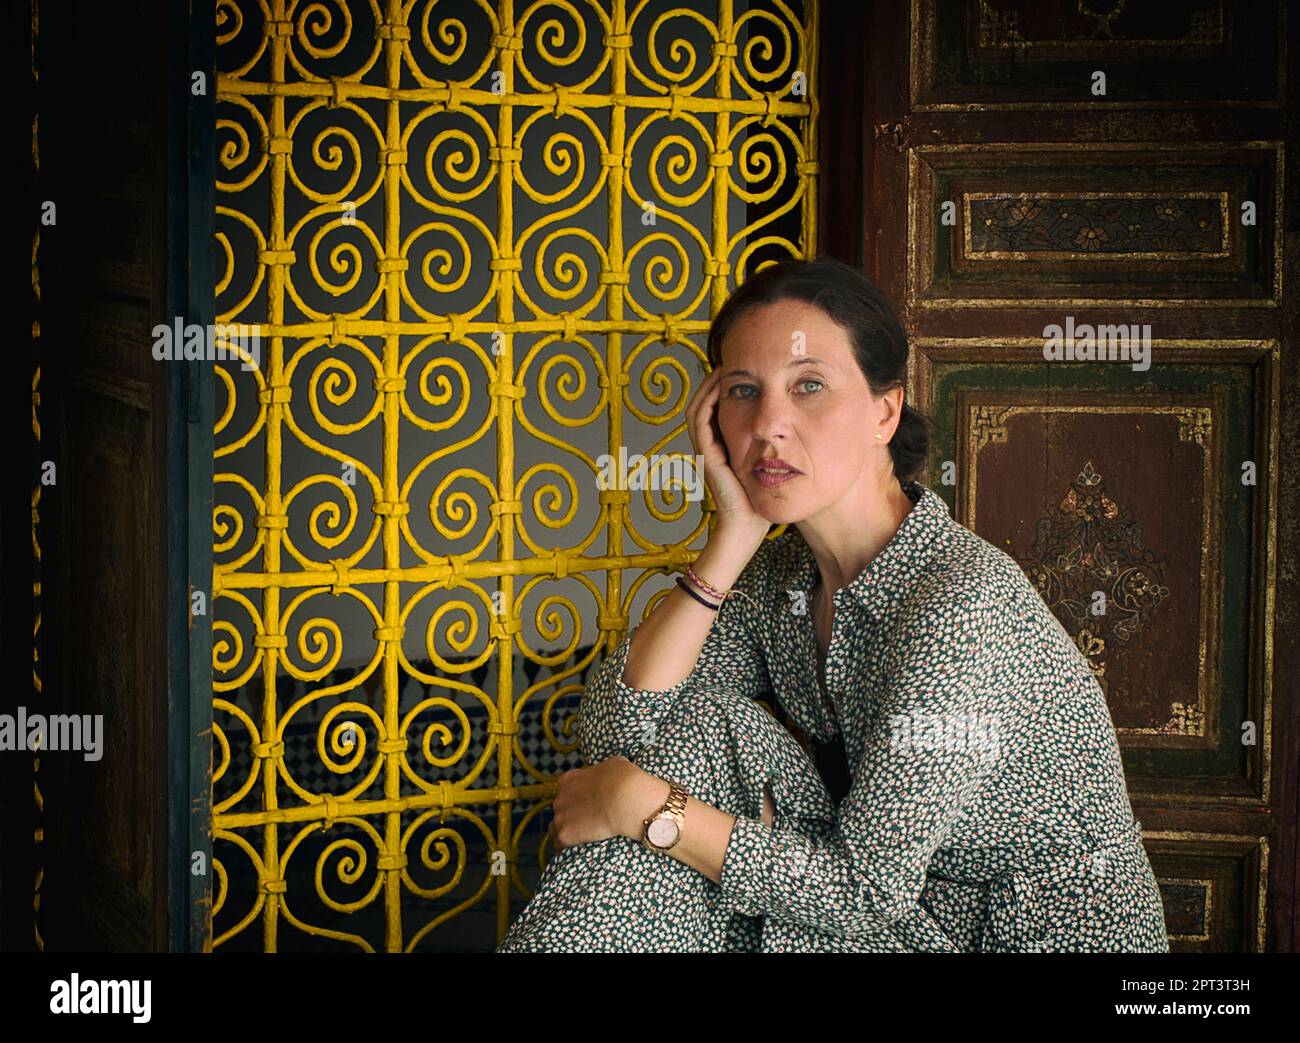 woman leaning against a moroccan style window, marrakech Stock Photo